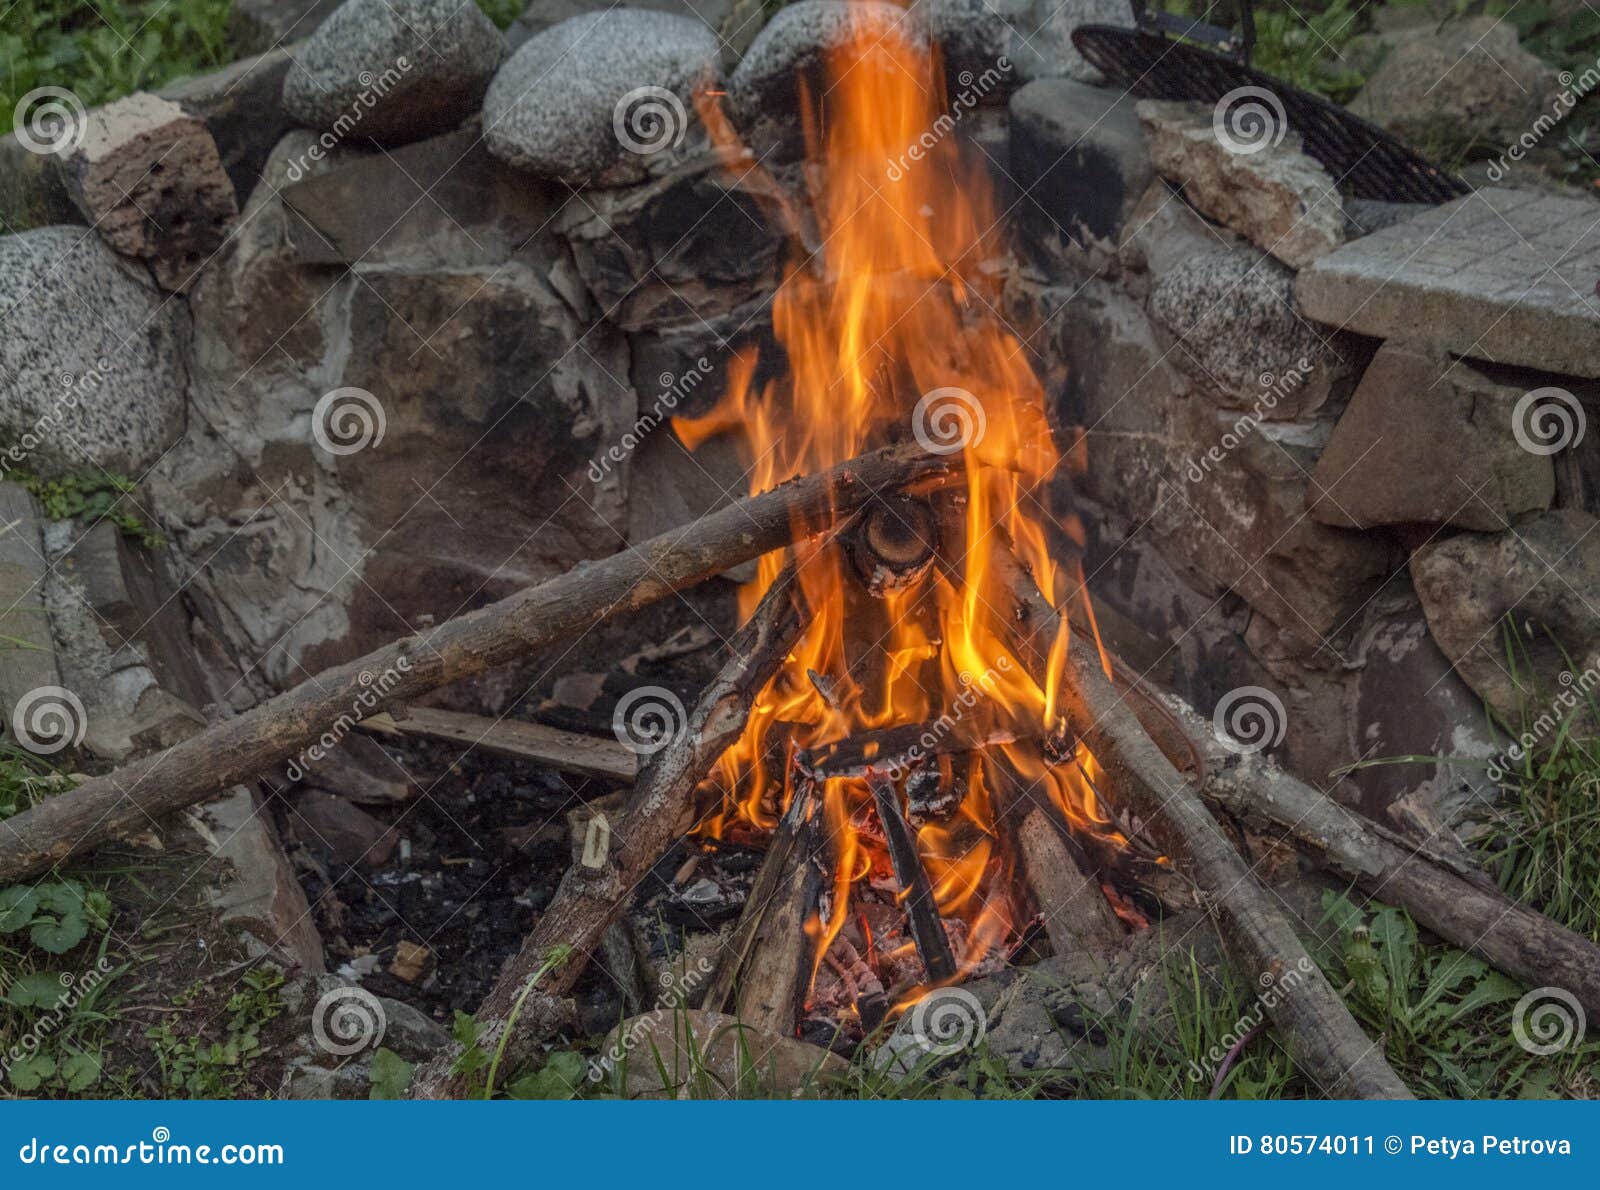 Campfire stock image. Image of ring, burn, campfire, pitchwood - 80574011